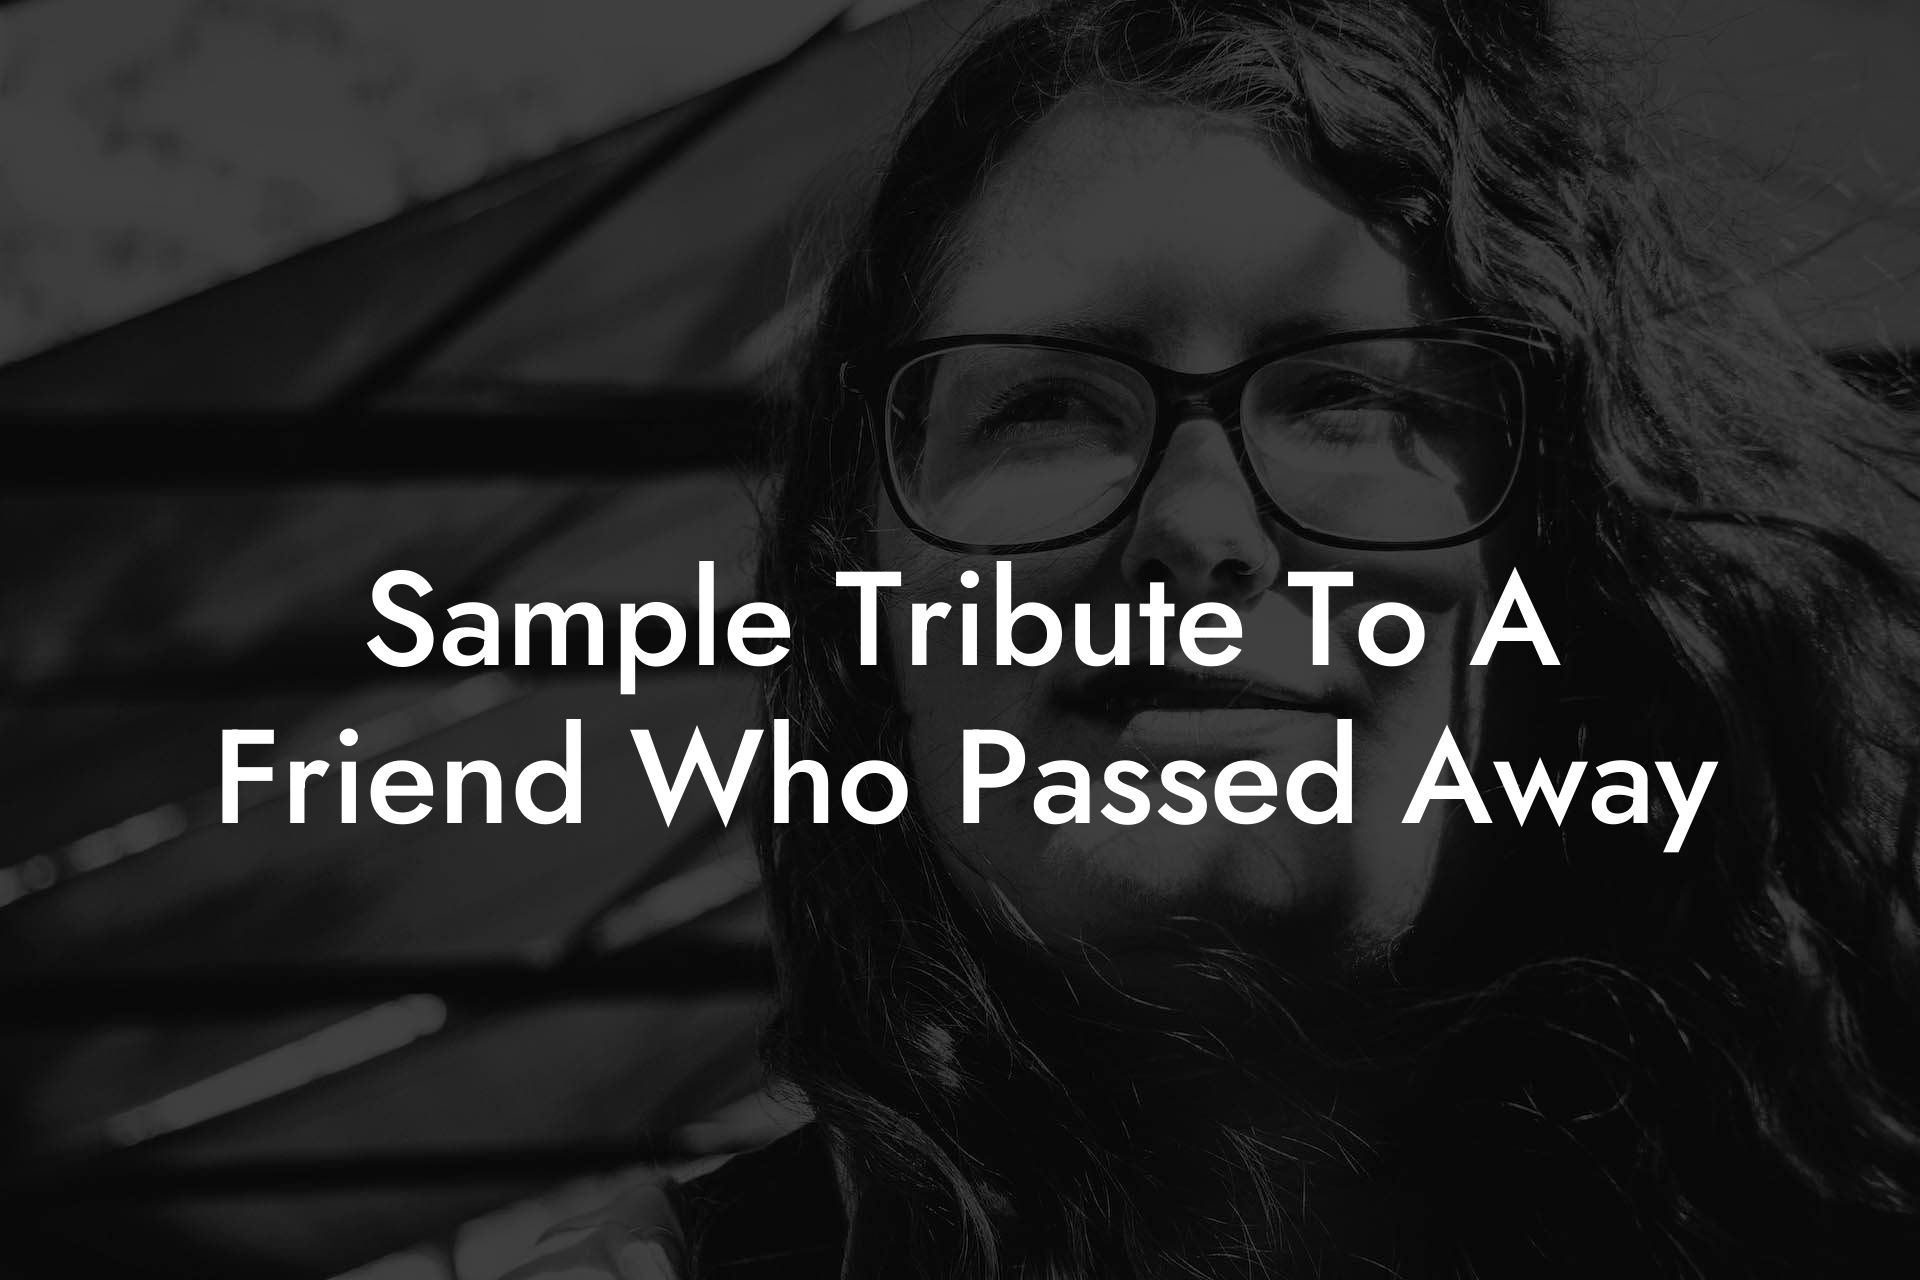 Sample Tribute To A Friend Who Passed Away